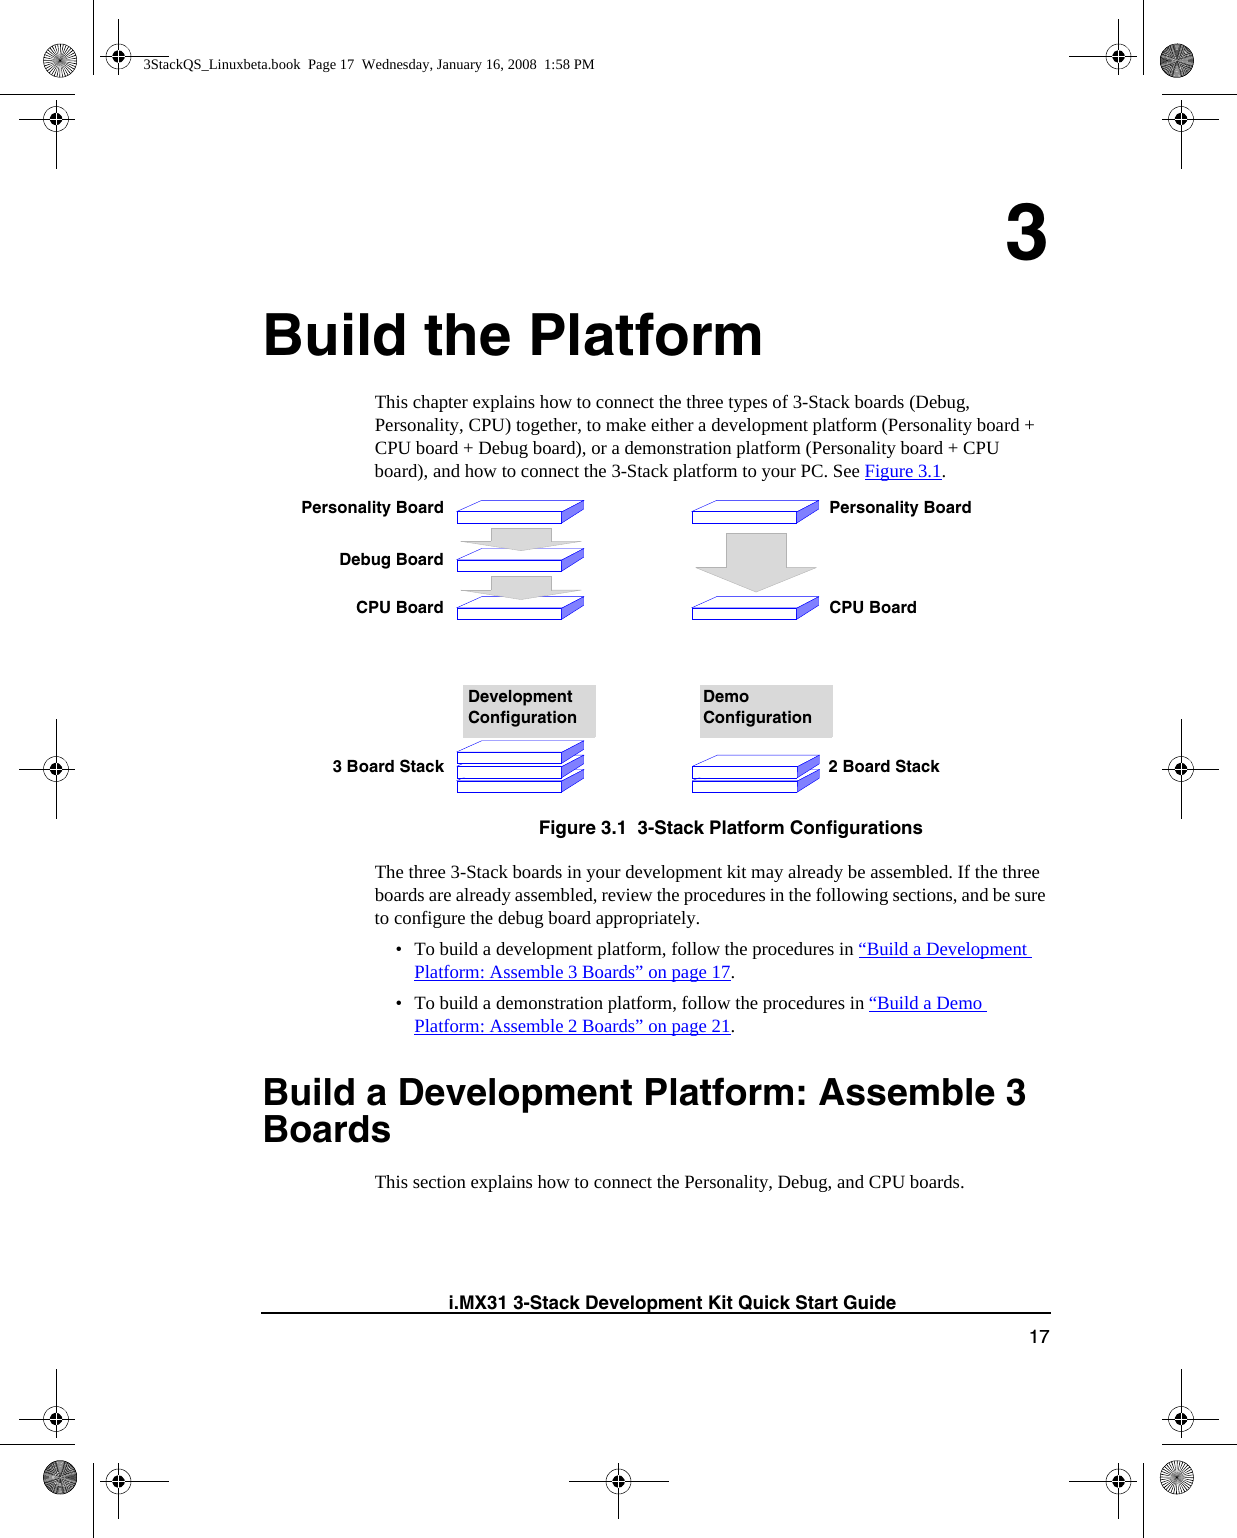 17i.MX31 3-Stack Development Kit Quick Start Guide3Build the PlatformThis chapter explains how to connect the three types of 3-Stack boards (Debug, Personality, CPU) together, to make either a development platform (Personality board + CPU board + Debug board), or a demonstration platform (Personality board + CPU board), and how to connect the 3-Stack platform to your PC. See Figure 3.1. Figure 3.1  3-Stack Platform ConfigurationsThe three 3-Stack boards in your development kit may already be assembled. If the three boards are already assembled, review the procedures in the following sections, and be sure to configure the debug board appropriately.• To build a development platform, follow the procedures in “Build a Development Platform: Assemble 3 Boards” on page 17. • To build a demonstration platform, follow the procedures in “Build a Demo Platform: Assemble 2 Boards” on page 21.Build a Development Platform: Assemble 3 Boards This section explains how to connect the Personality, Debug, and CPU boards.Development ConfigurationPersonality BoardDebug BoardCPU BoardDemo ConfigurationPersonality BoardCPU Board3 Board Stack 2 Board Stack3StackQS_Linuxbeta.book  Page 17  Wednesday, January 16, 2008  1:58 PM